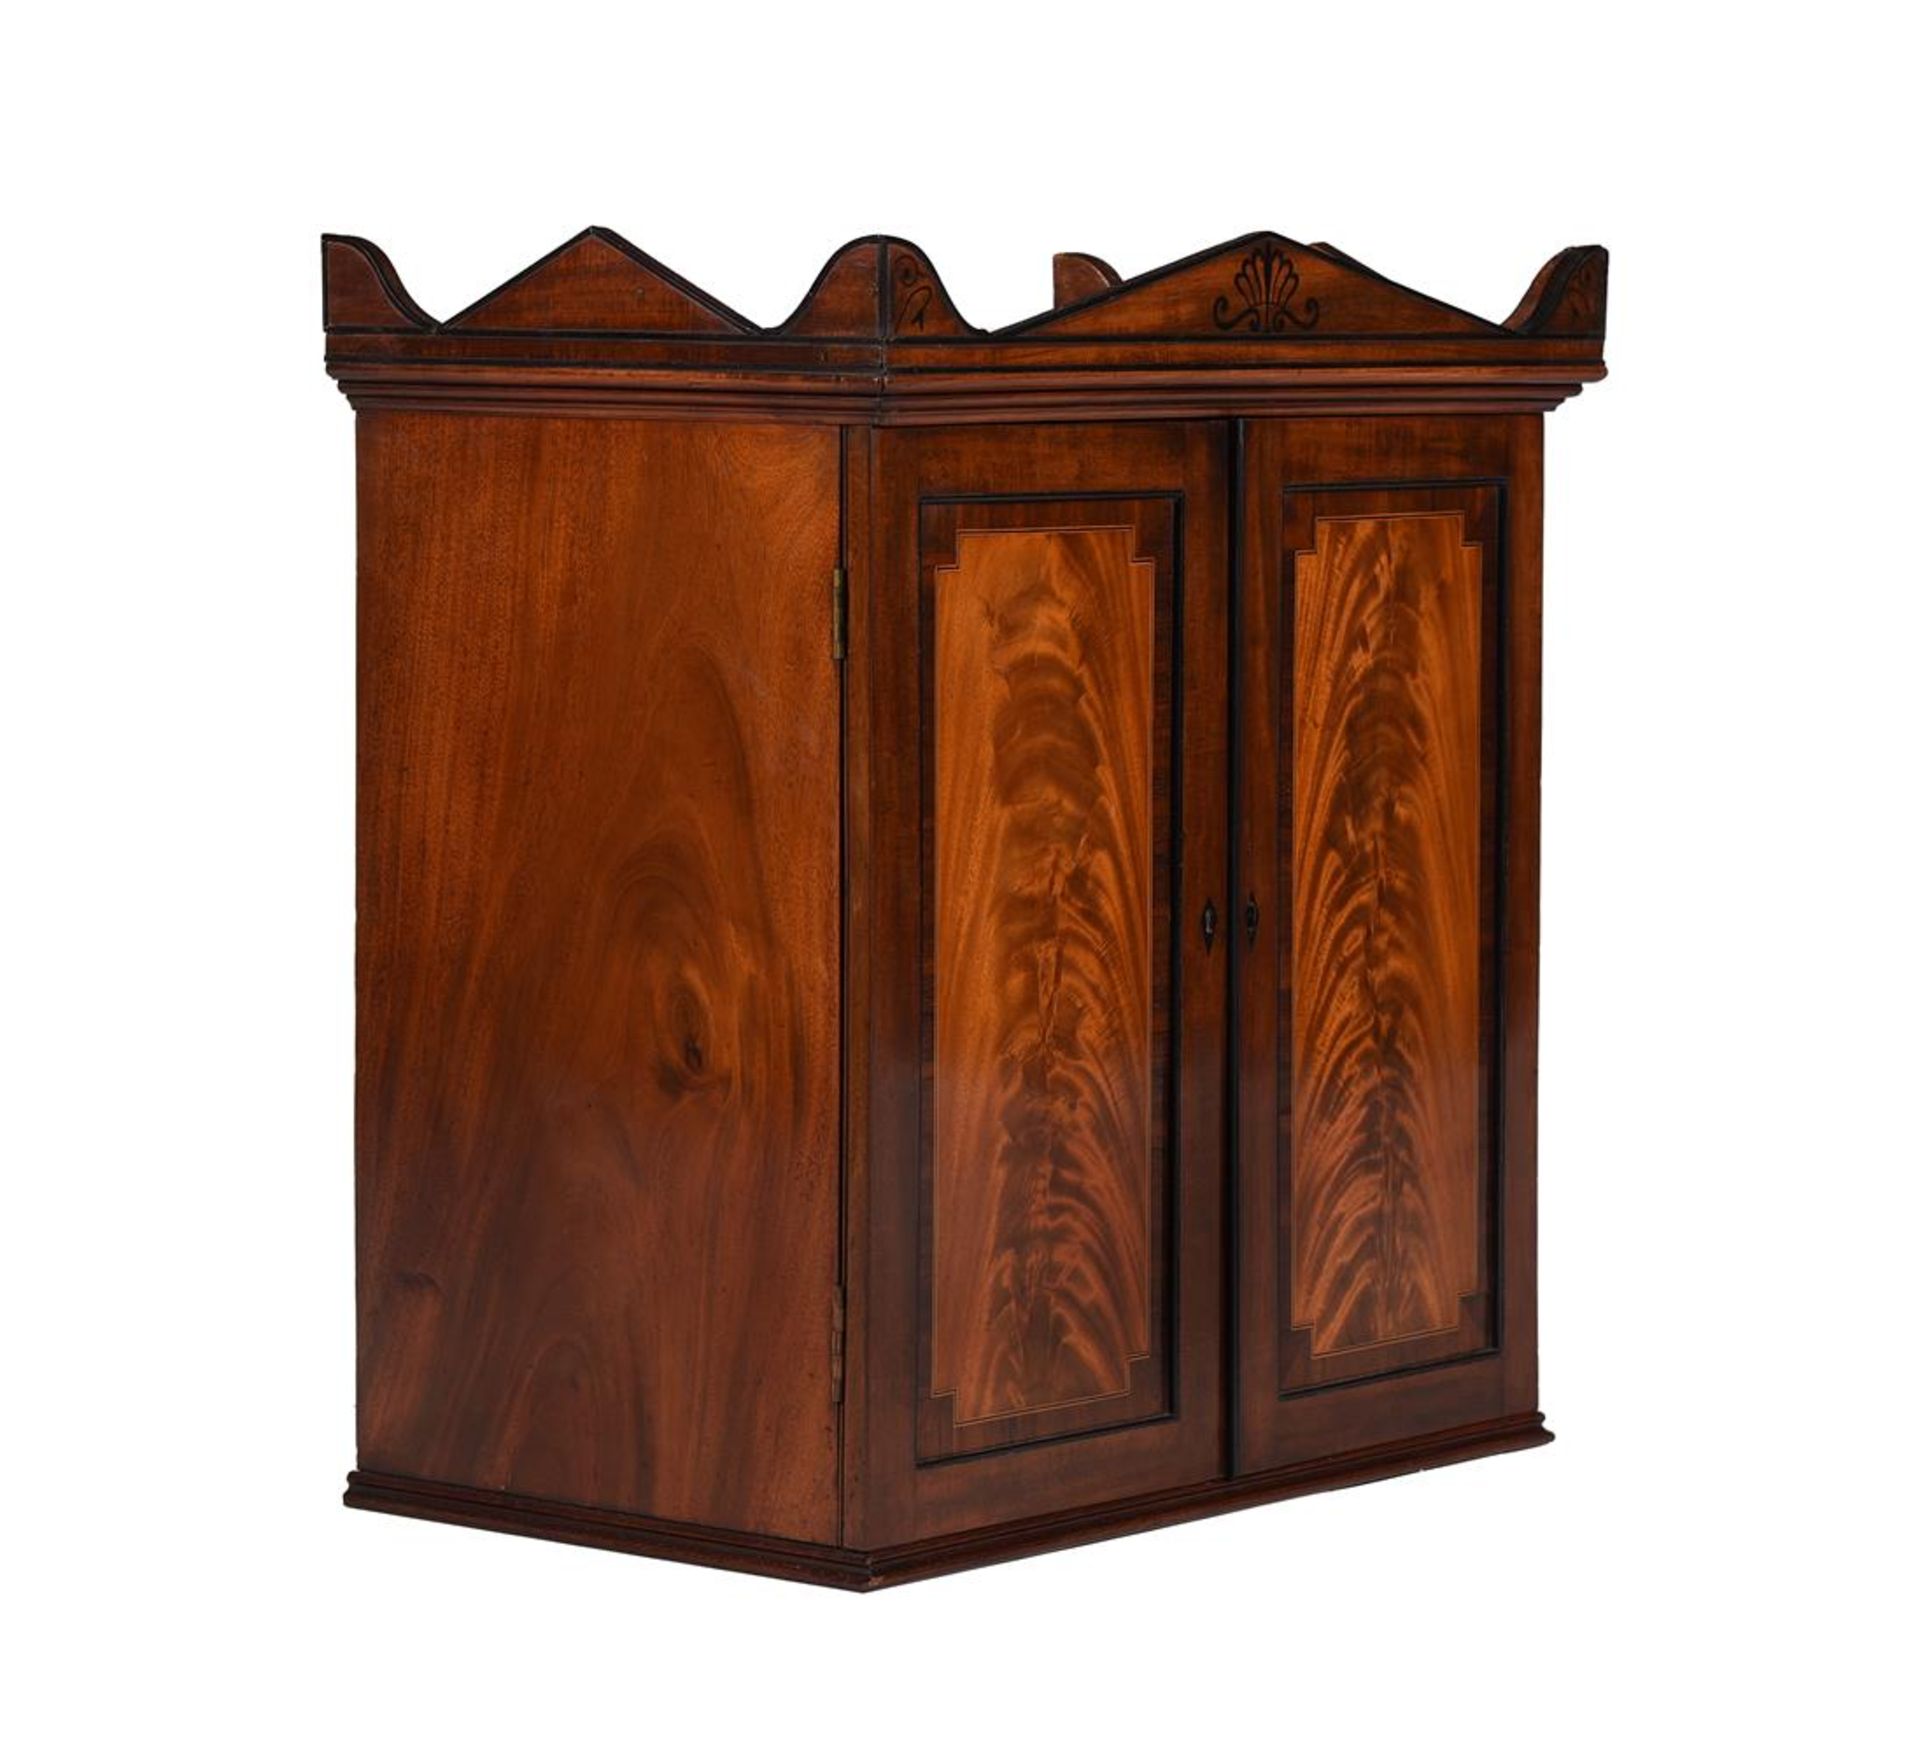 Y A REGENCY MAHOGANY AND EBONY INLAID COLLECTORS CABINET, EARLY 19TH CENTURY - Image 4 of 9